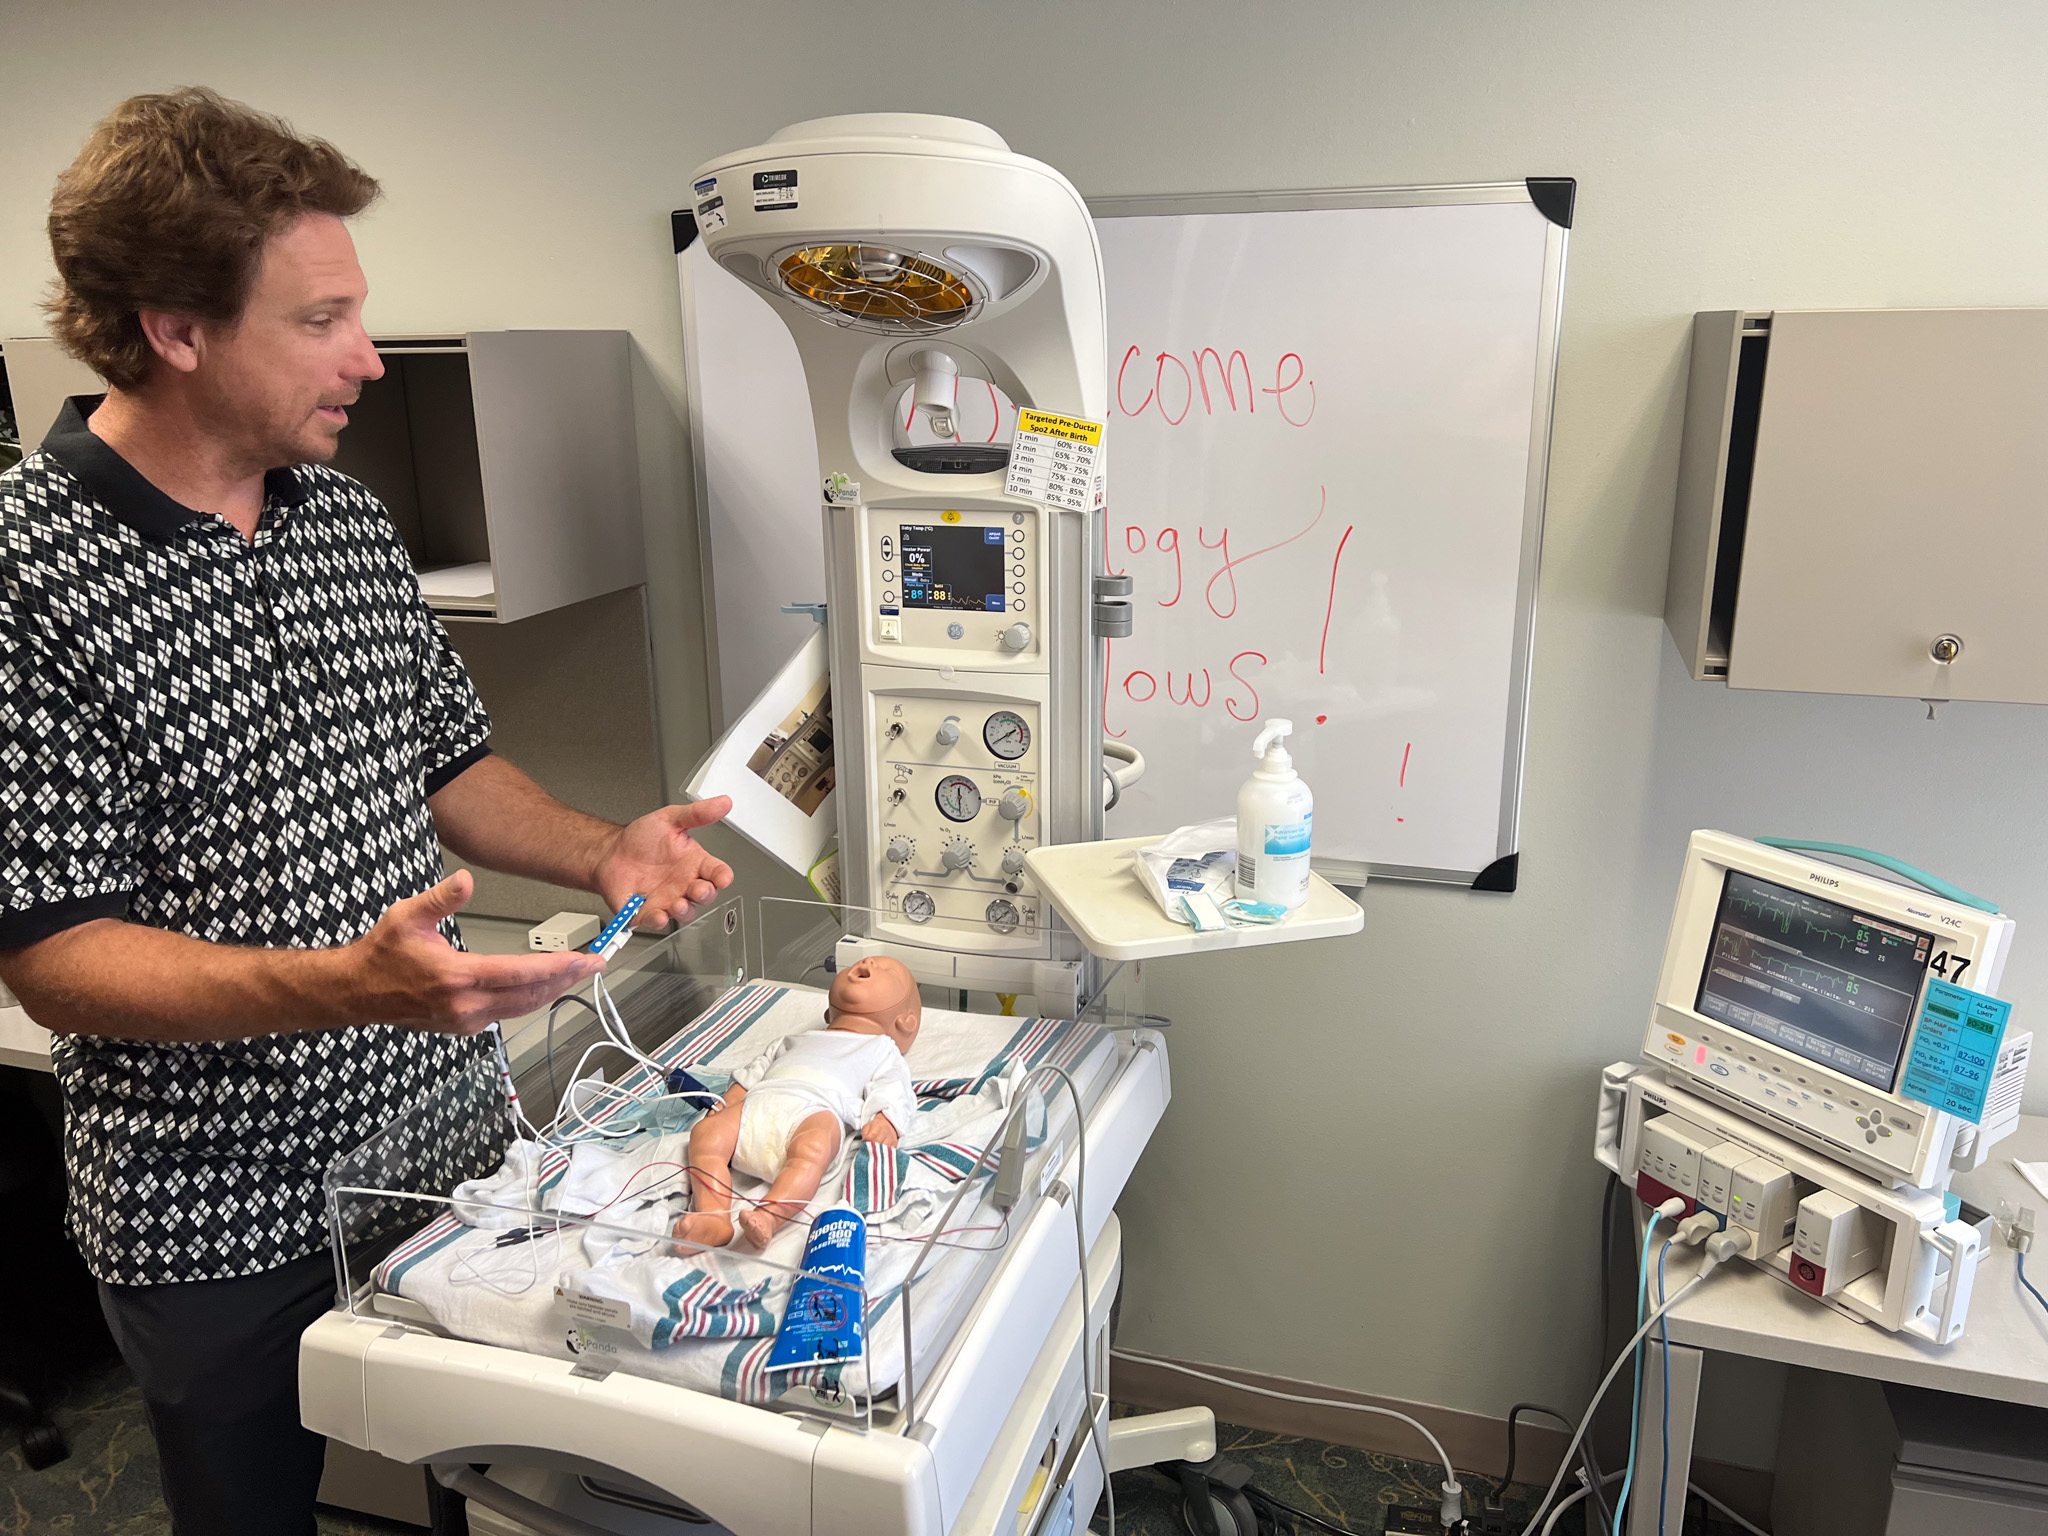 Mechanical engineering professor Chris Rylander with a model baby for research